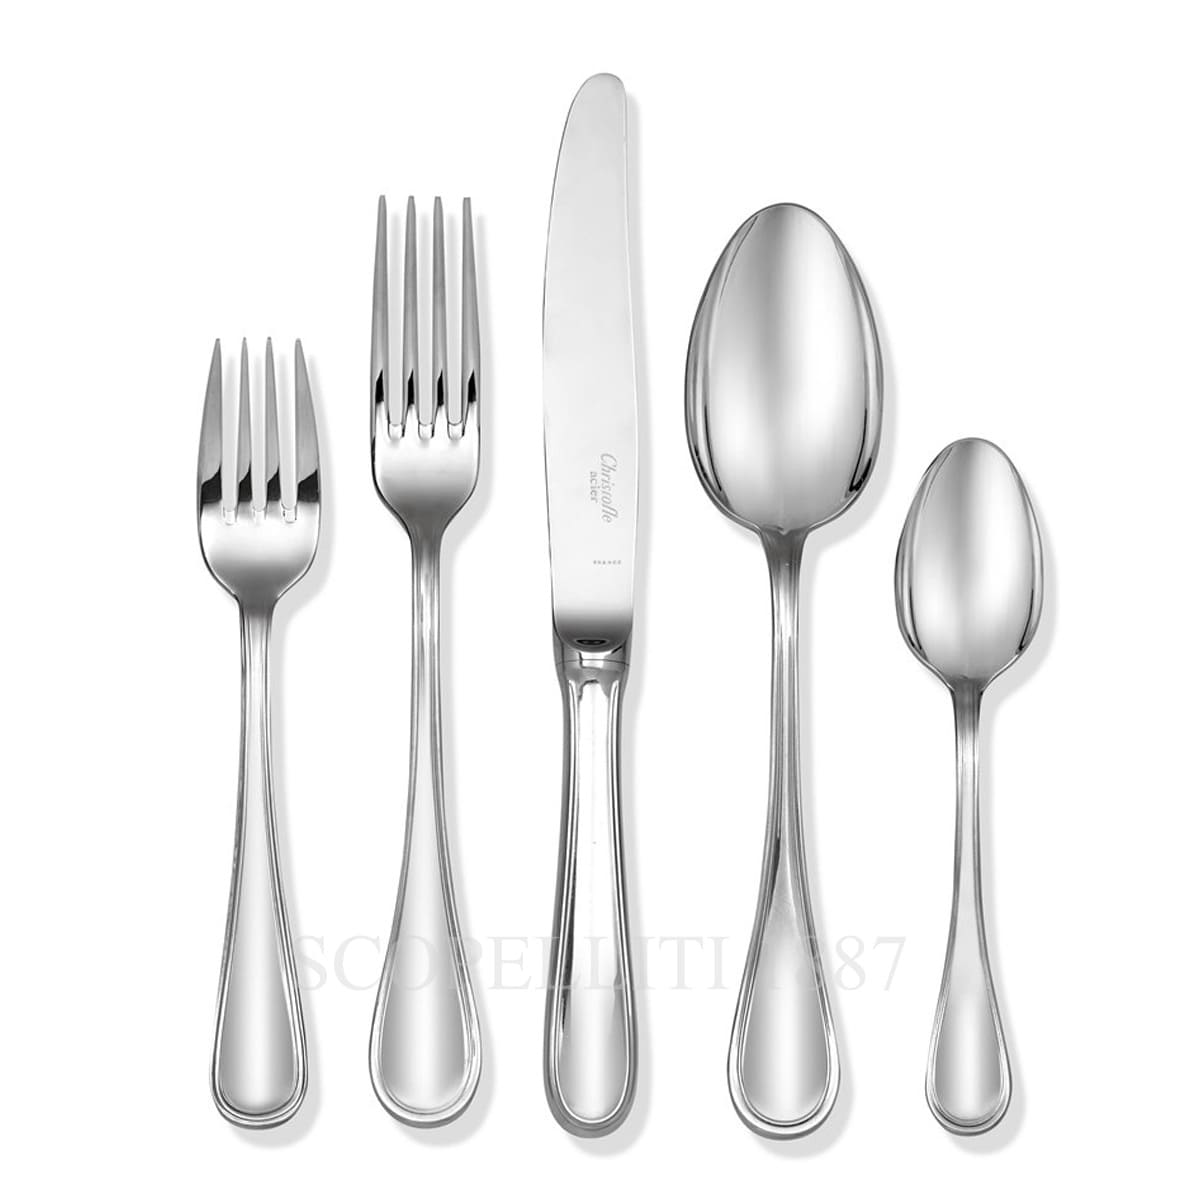 Christofle Silver Plated Albi Caviar Serving Set (& Complimentary